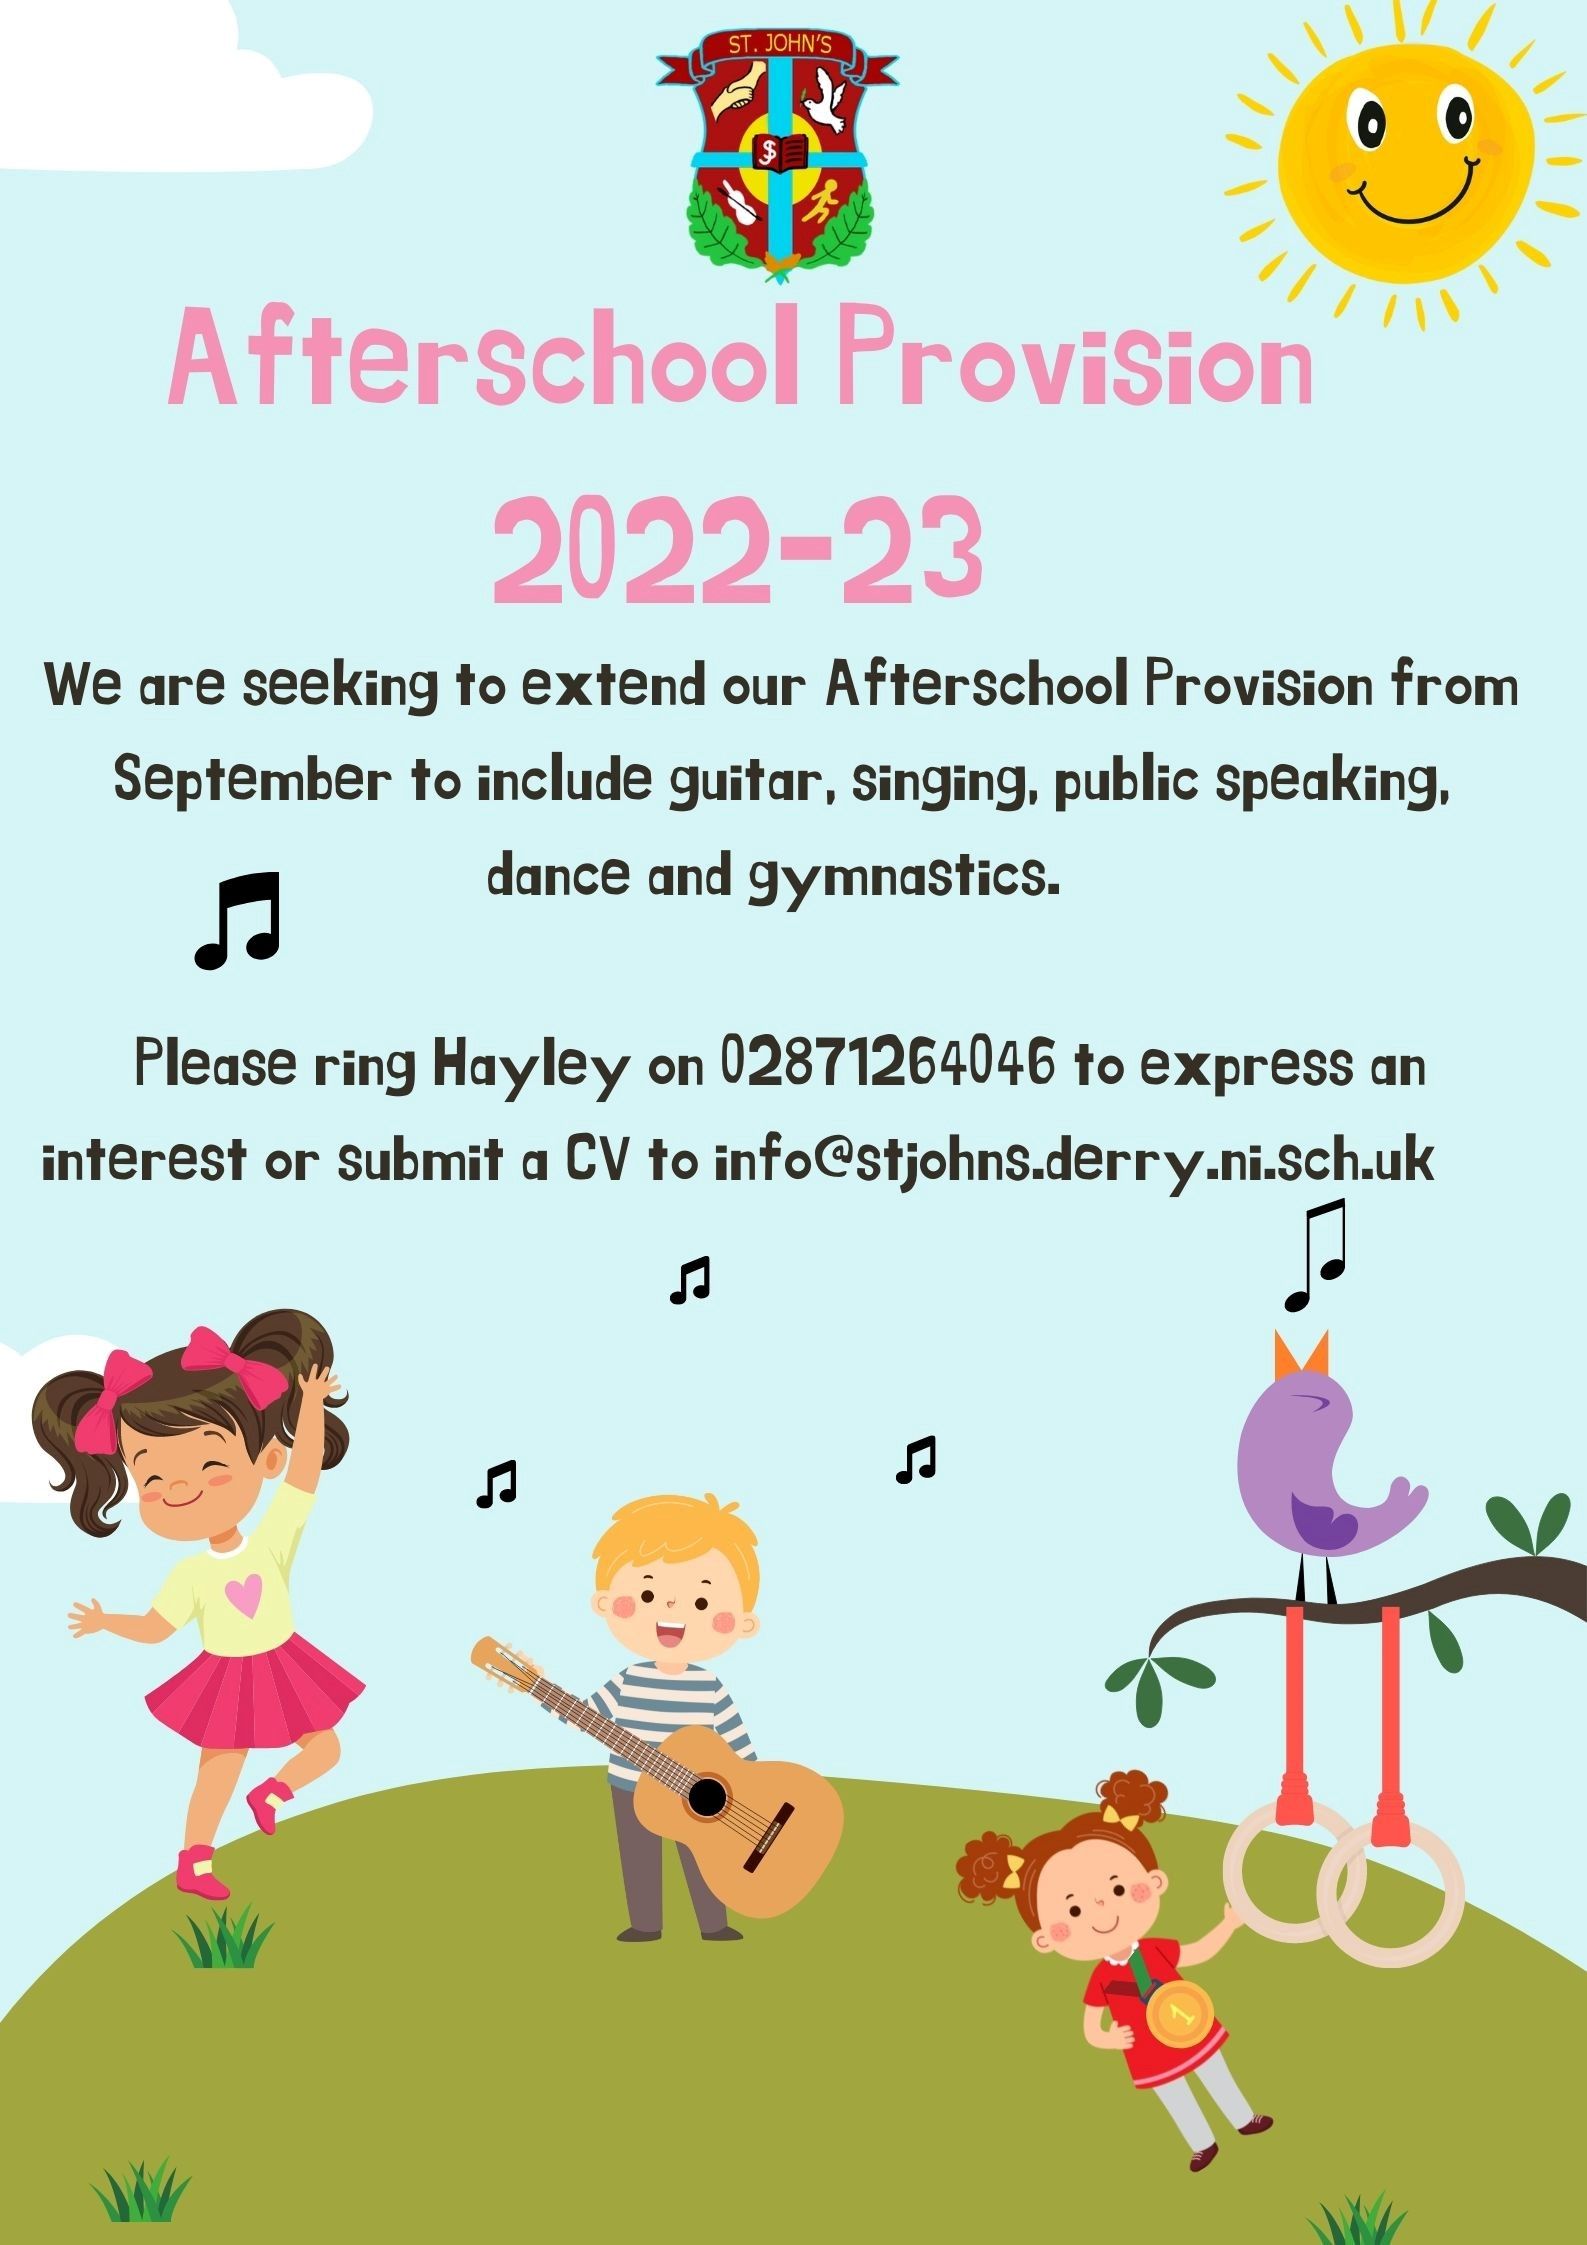 Afterschool Provision 2022-2023